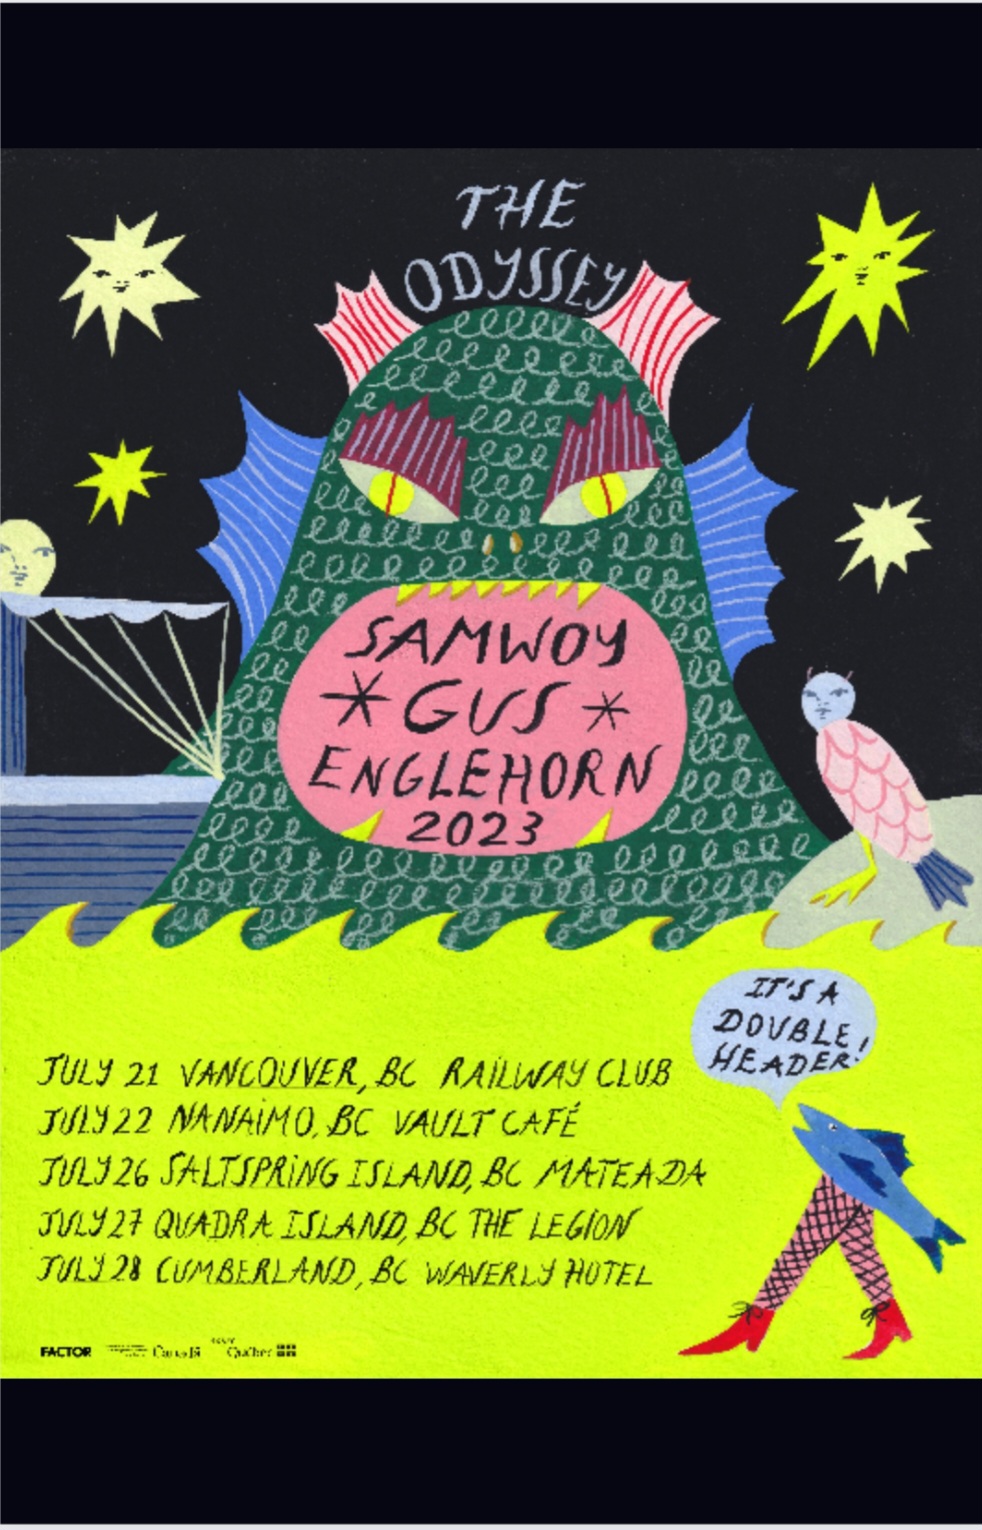 Samwoy and Gus Englehorn; The Odyssey Tour @ The Railway Club